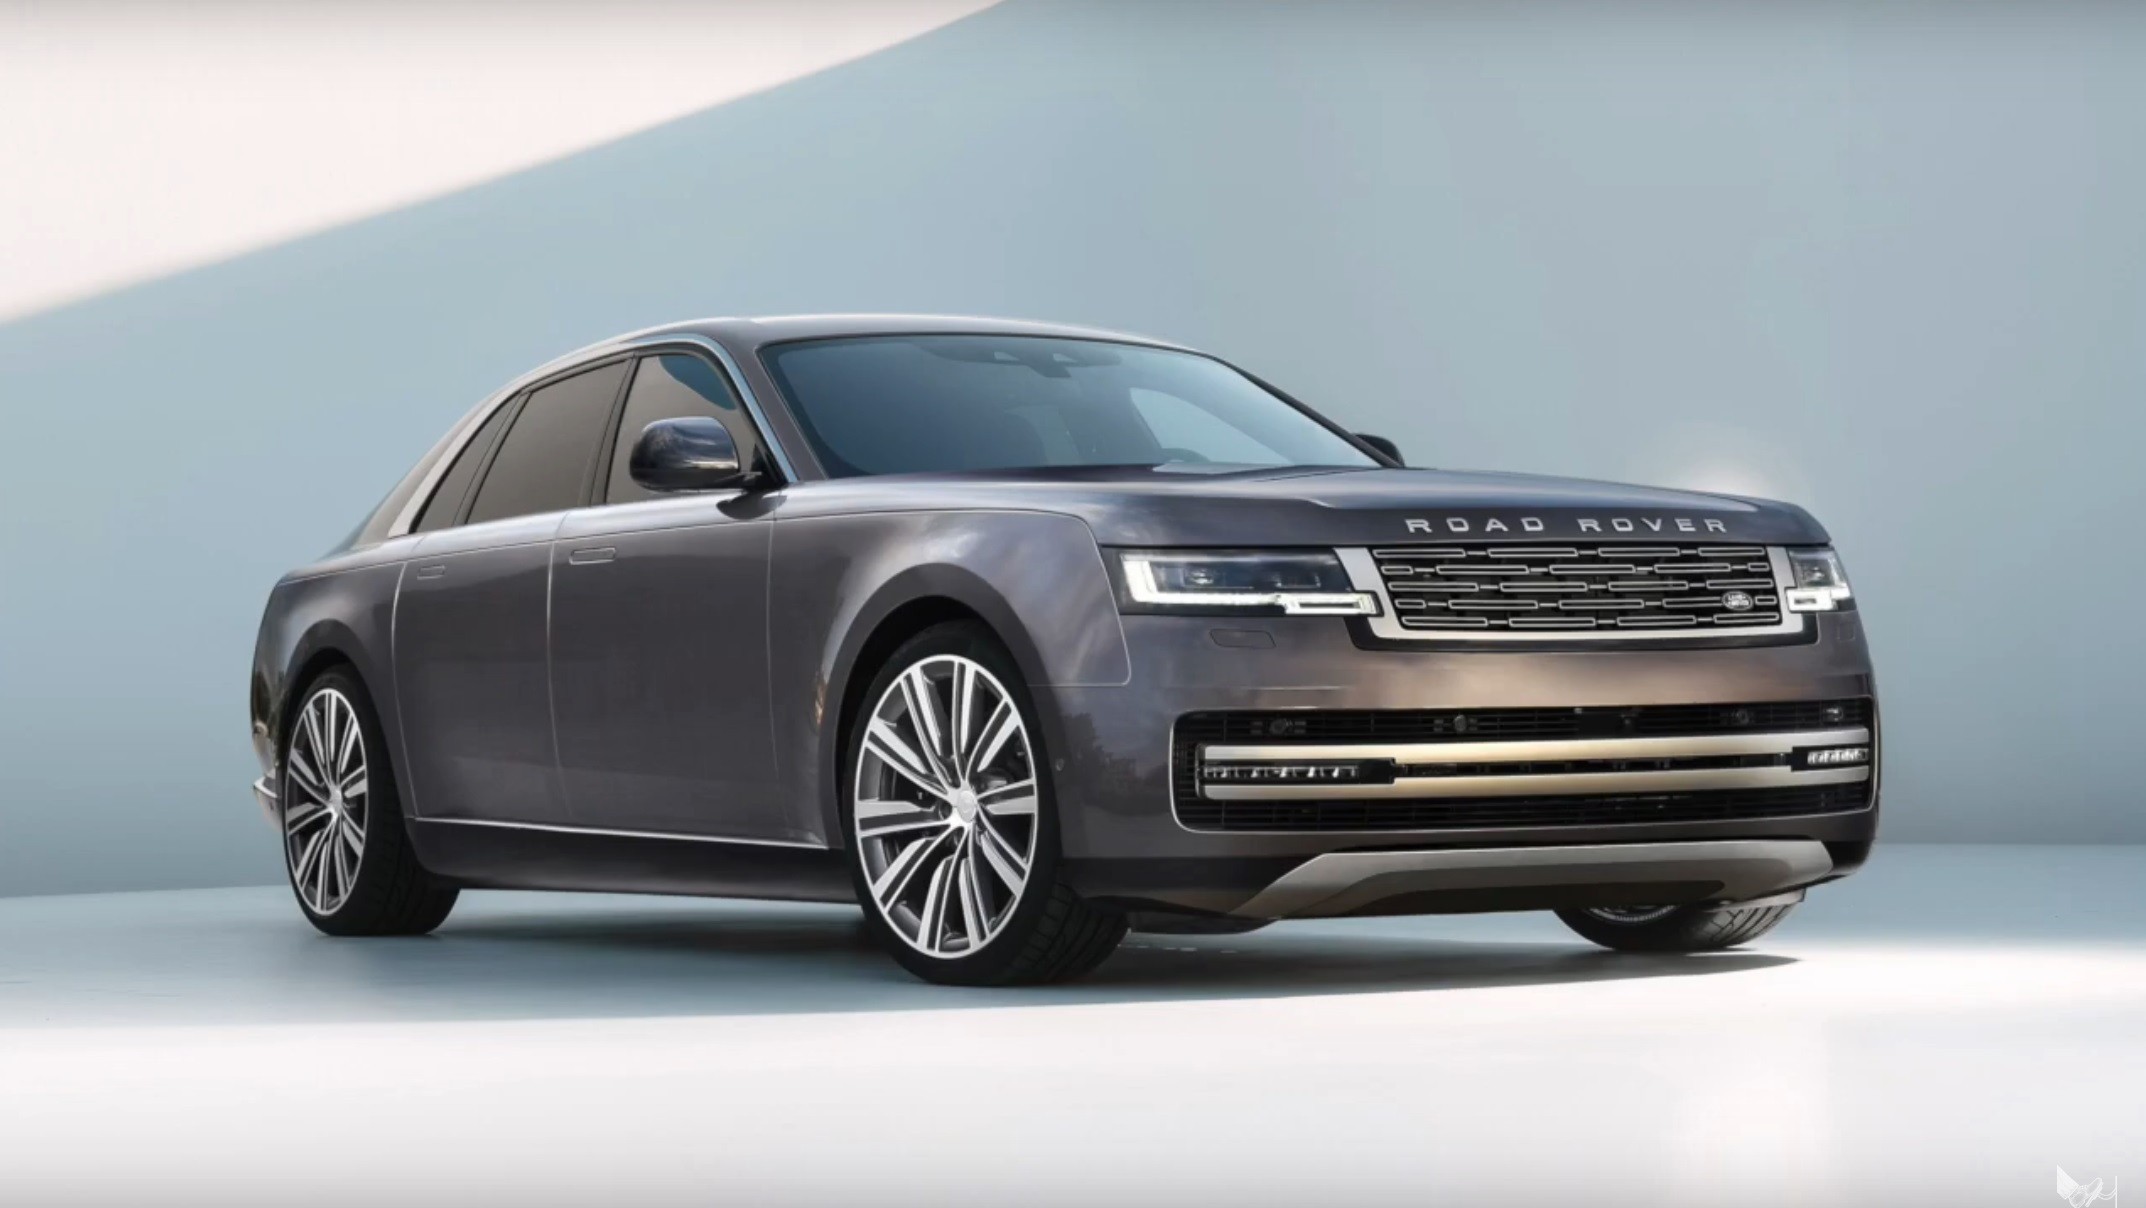 2023 - [Land Rover] Road Rover - Page 2 Range-rover-forces-itself-on-the-rolls-royce-ghost-new-luxury-sedan-is-born_1